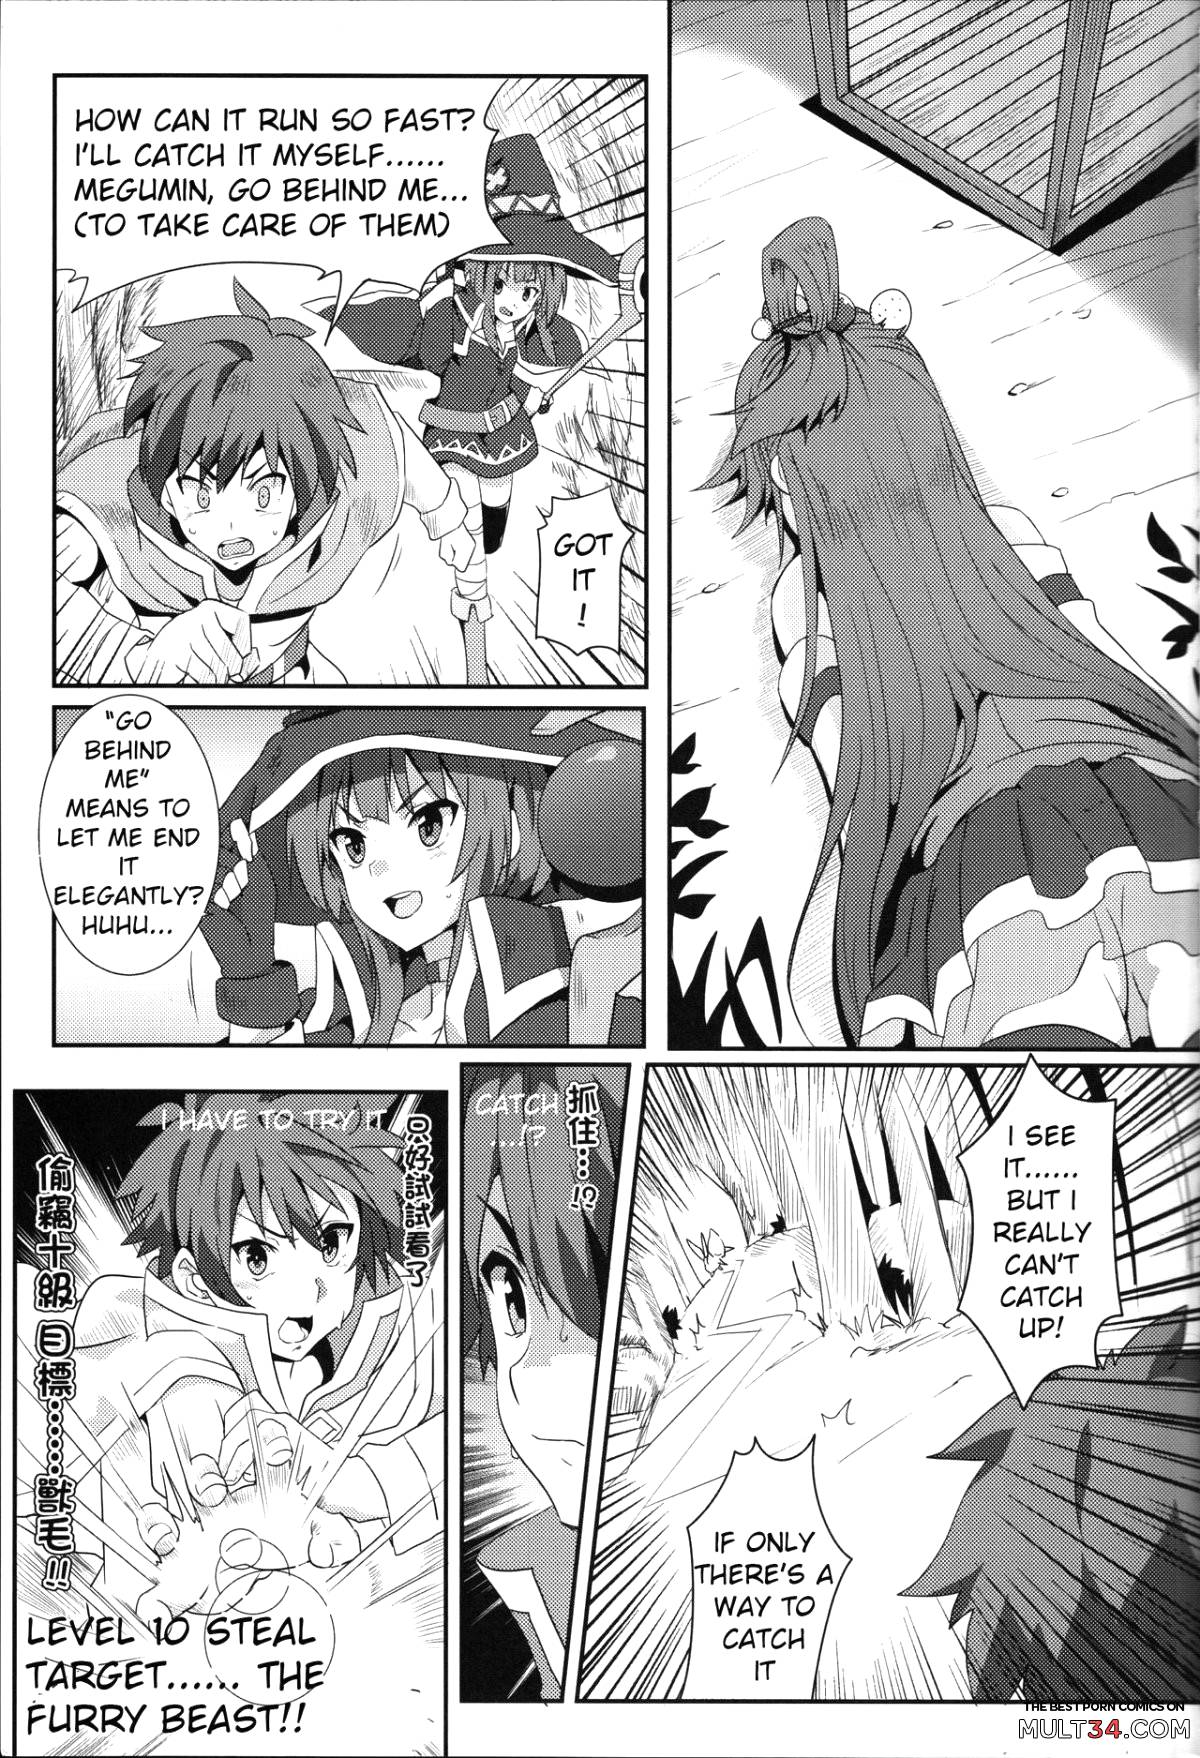 Blessing Megumin with a Magnificence Explosion! page 5